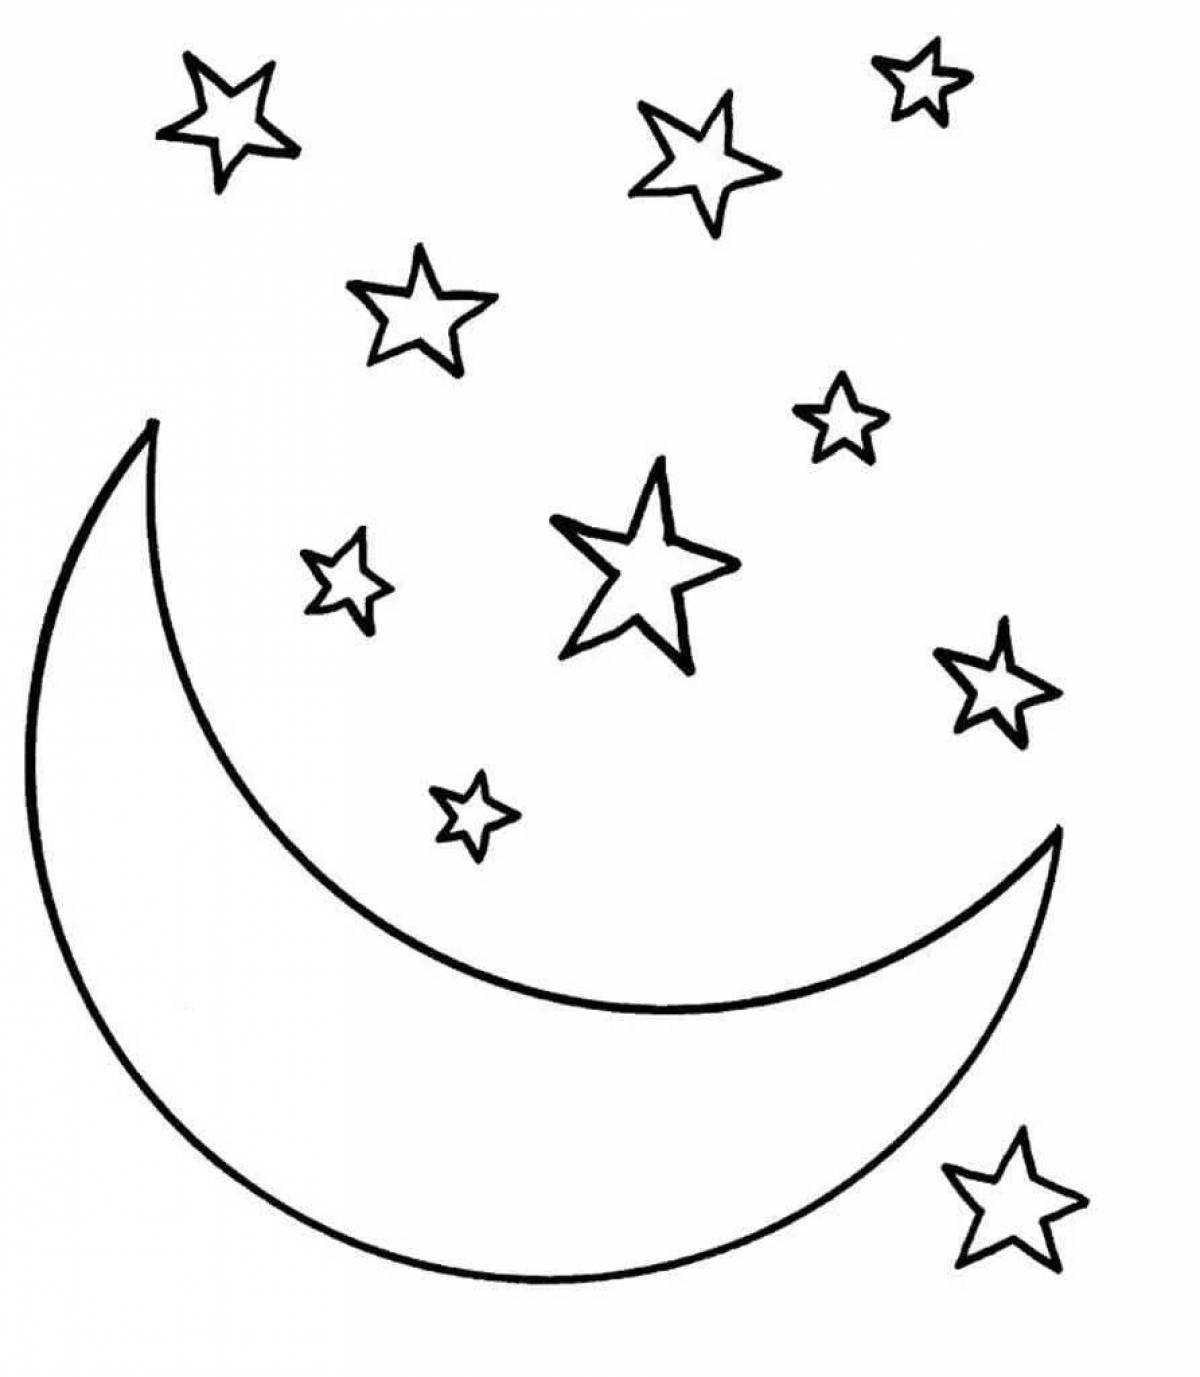 Colorful crescent moon coloring page